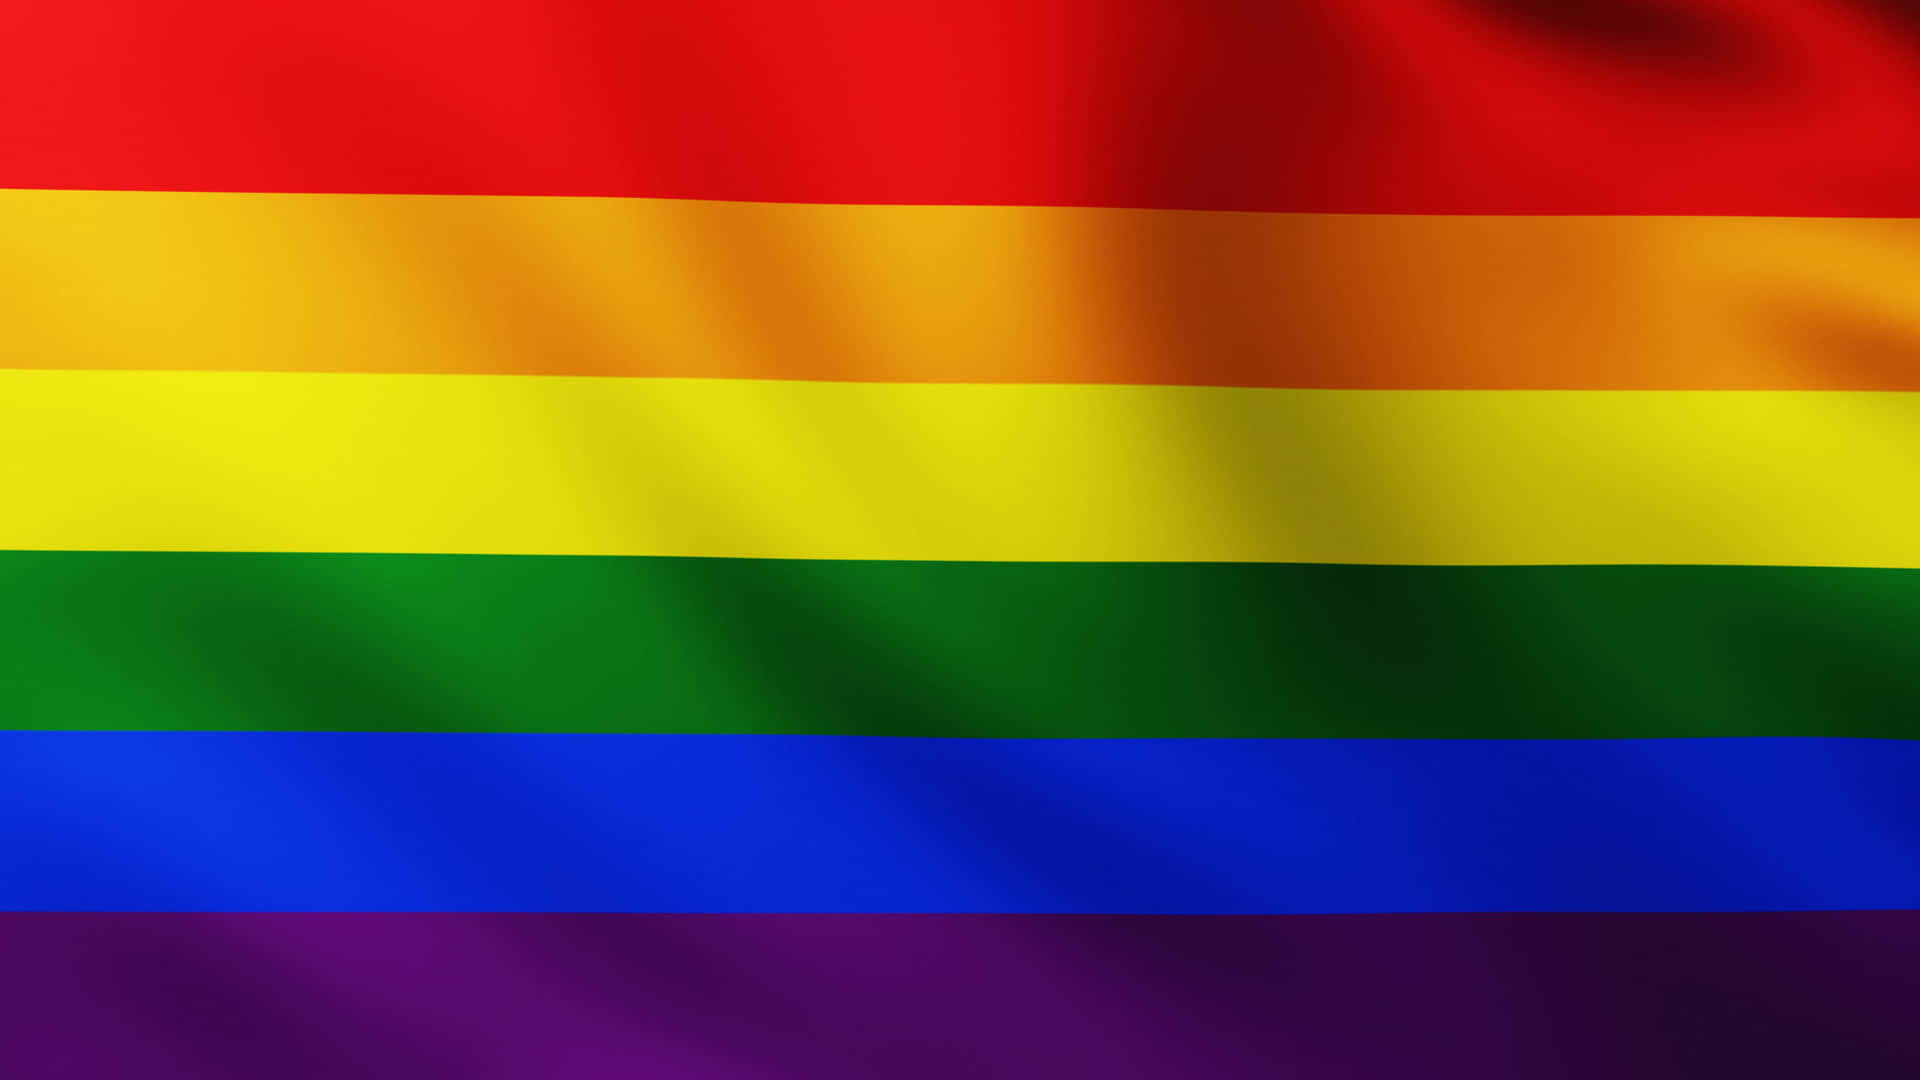 Show your Pride&Love with an amazing Pride Flag